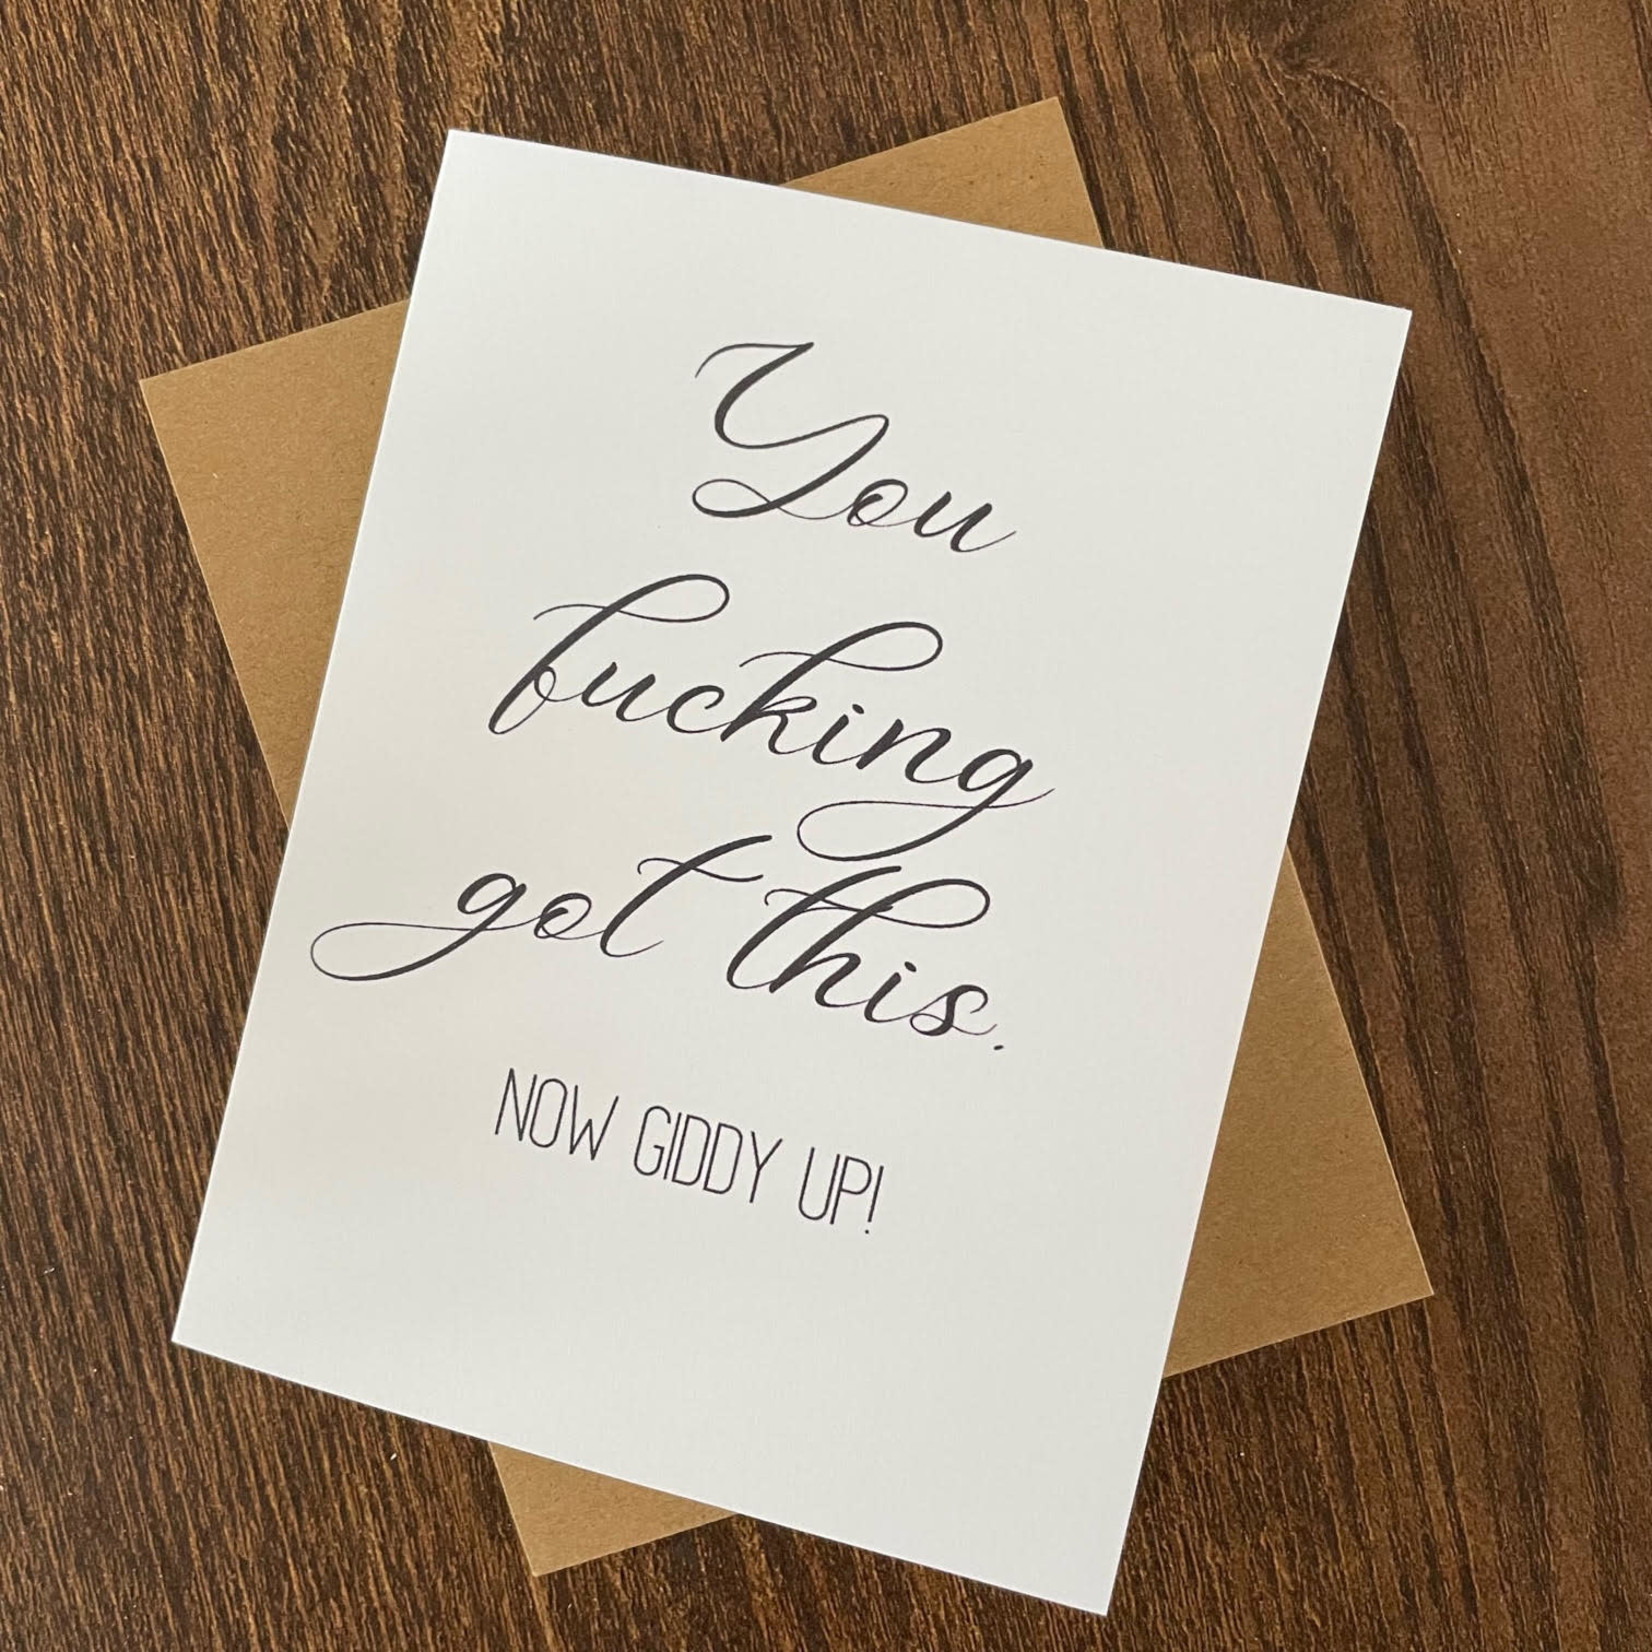 Greeting Card - You Fucking Got This. Now Giddy Up!